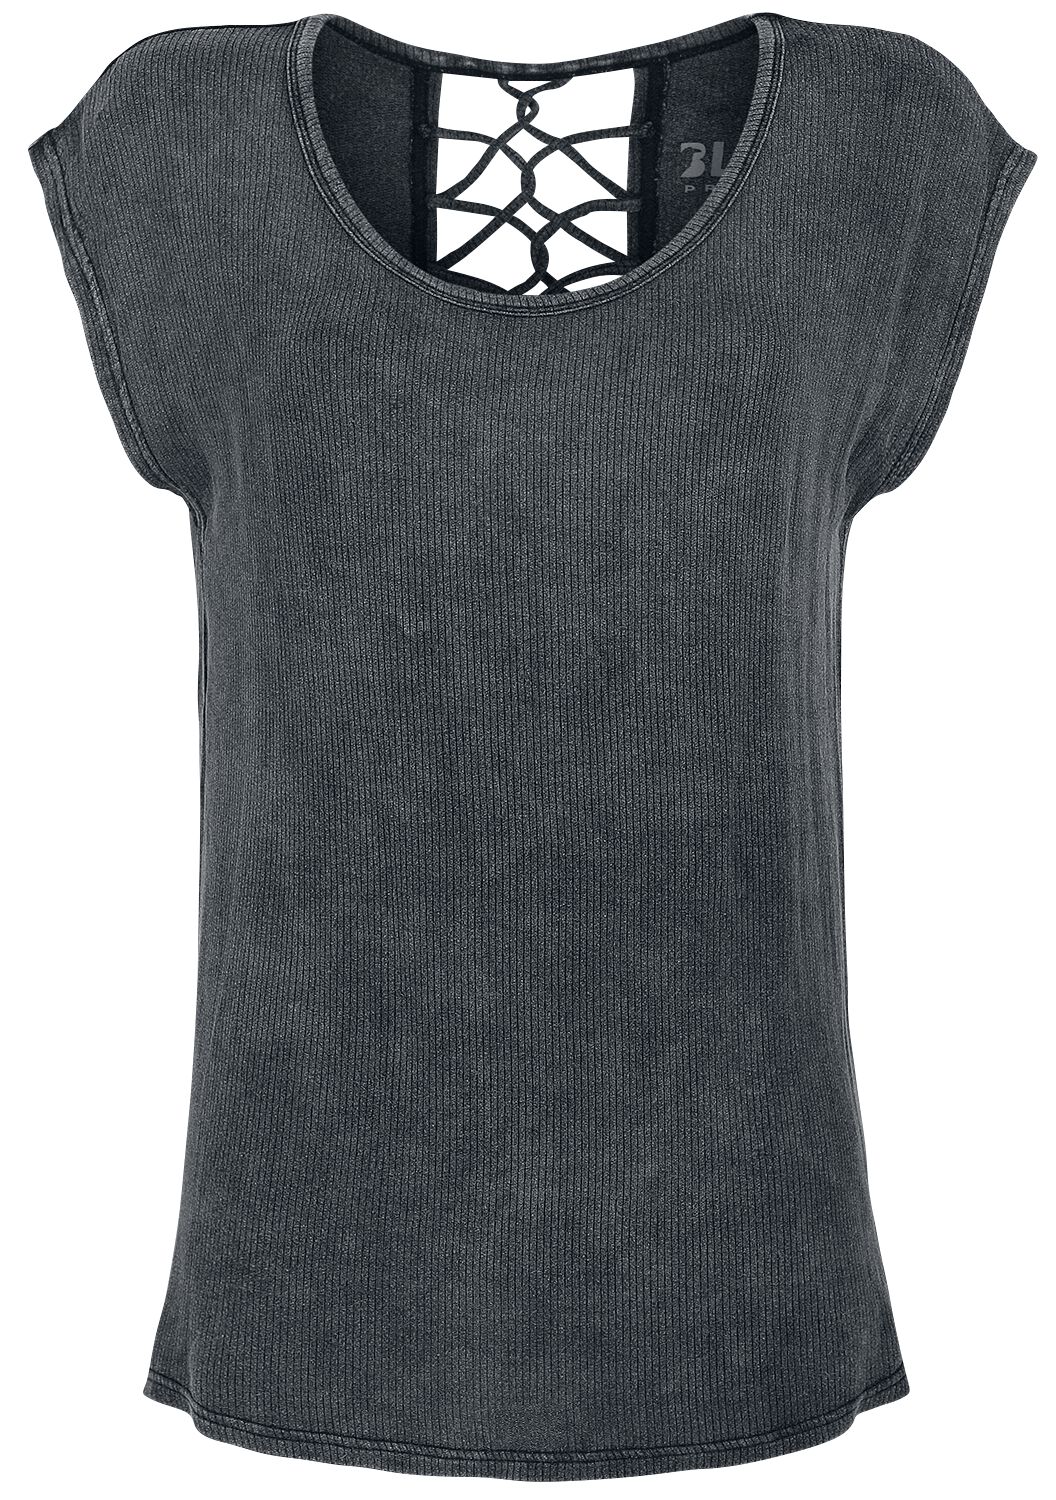 Image of T-Shirt di Black Premium by EMP - T-Shirt with Decorative Bands at the Back - S a XXL - Donna - nero